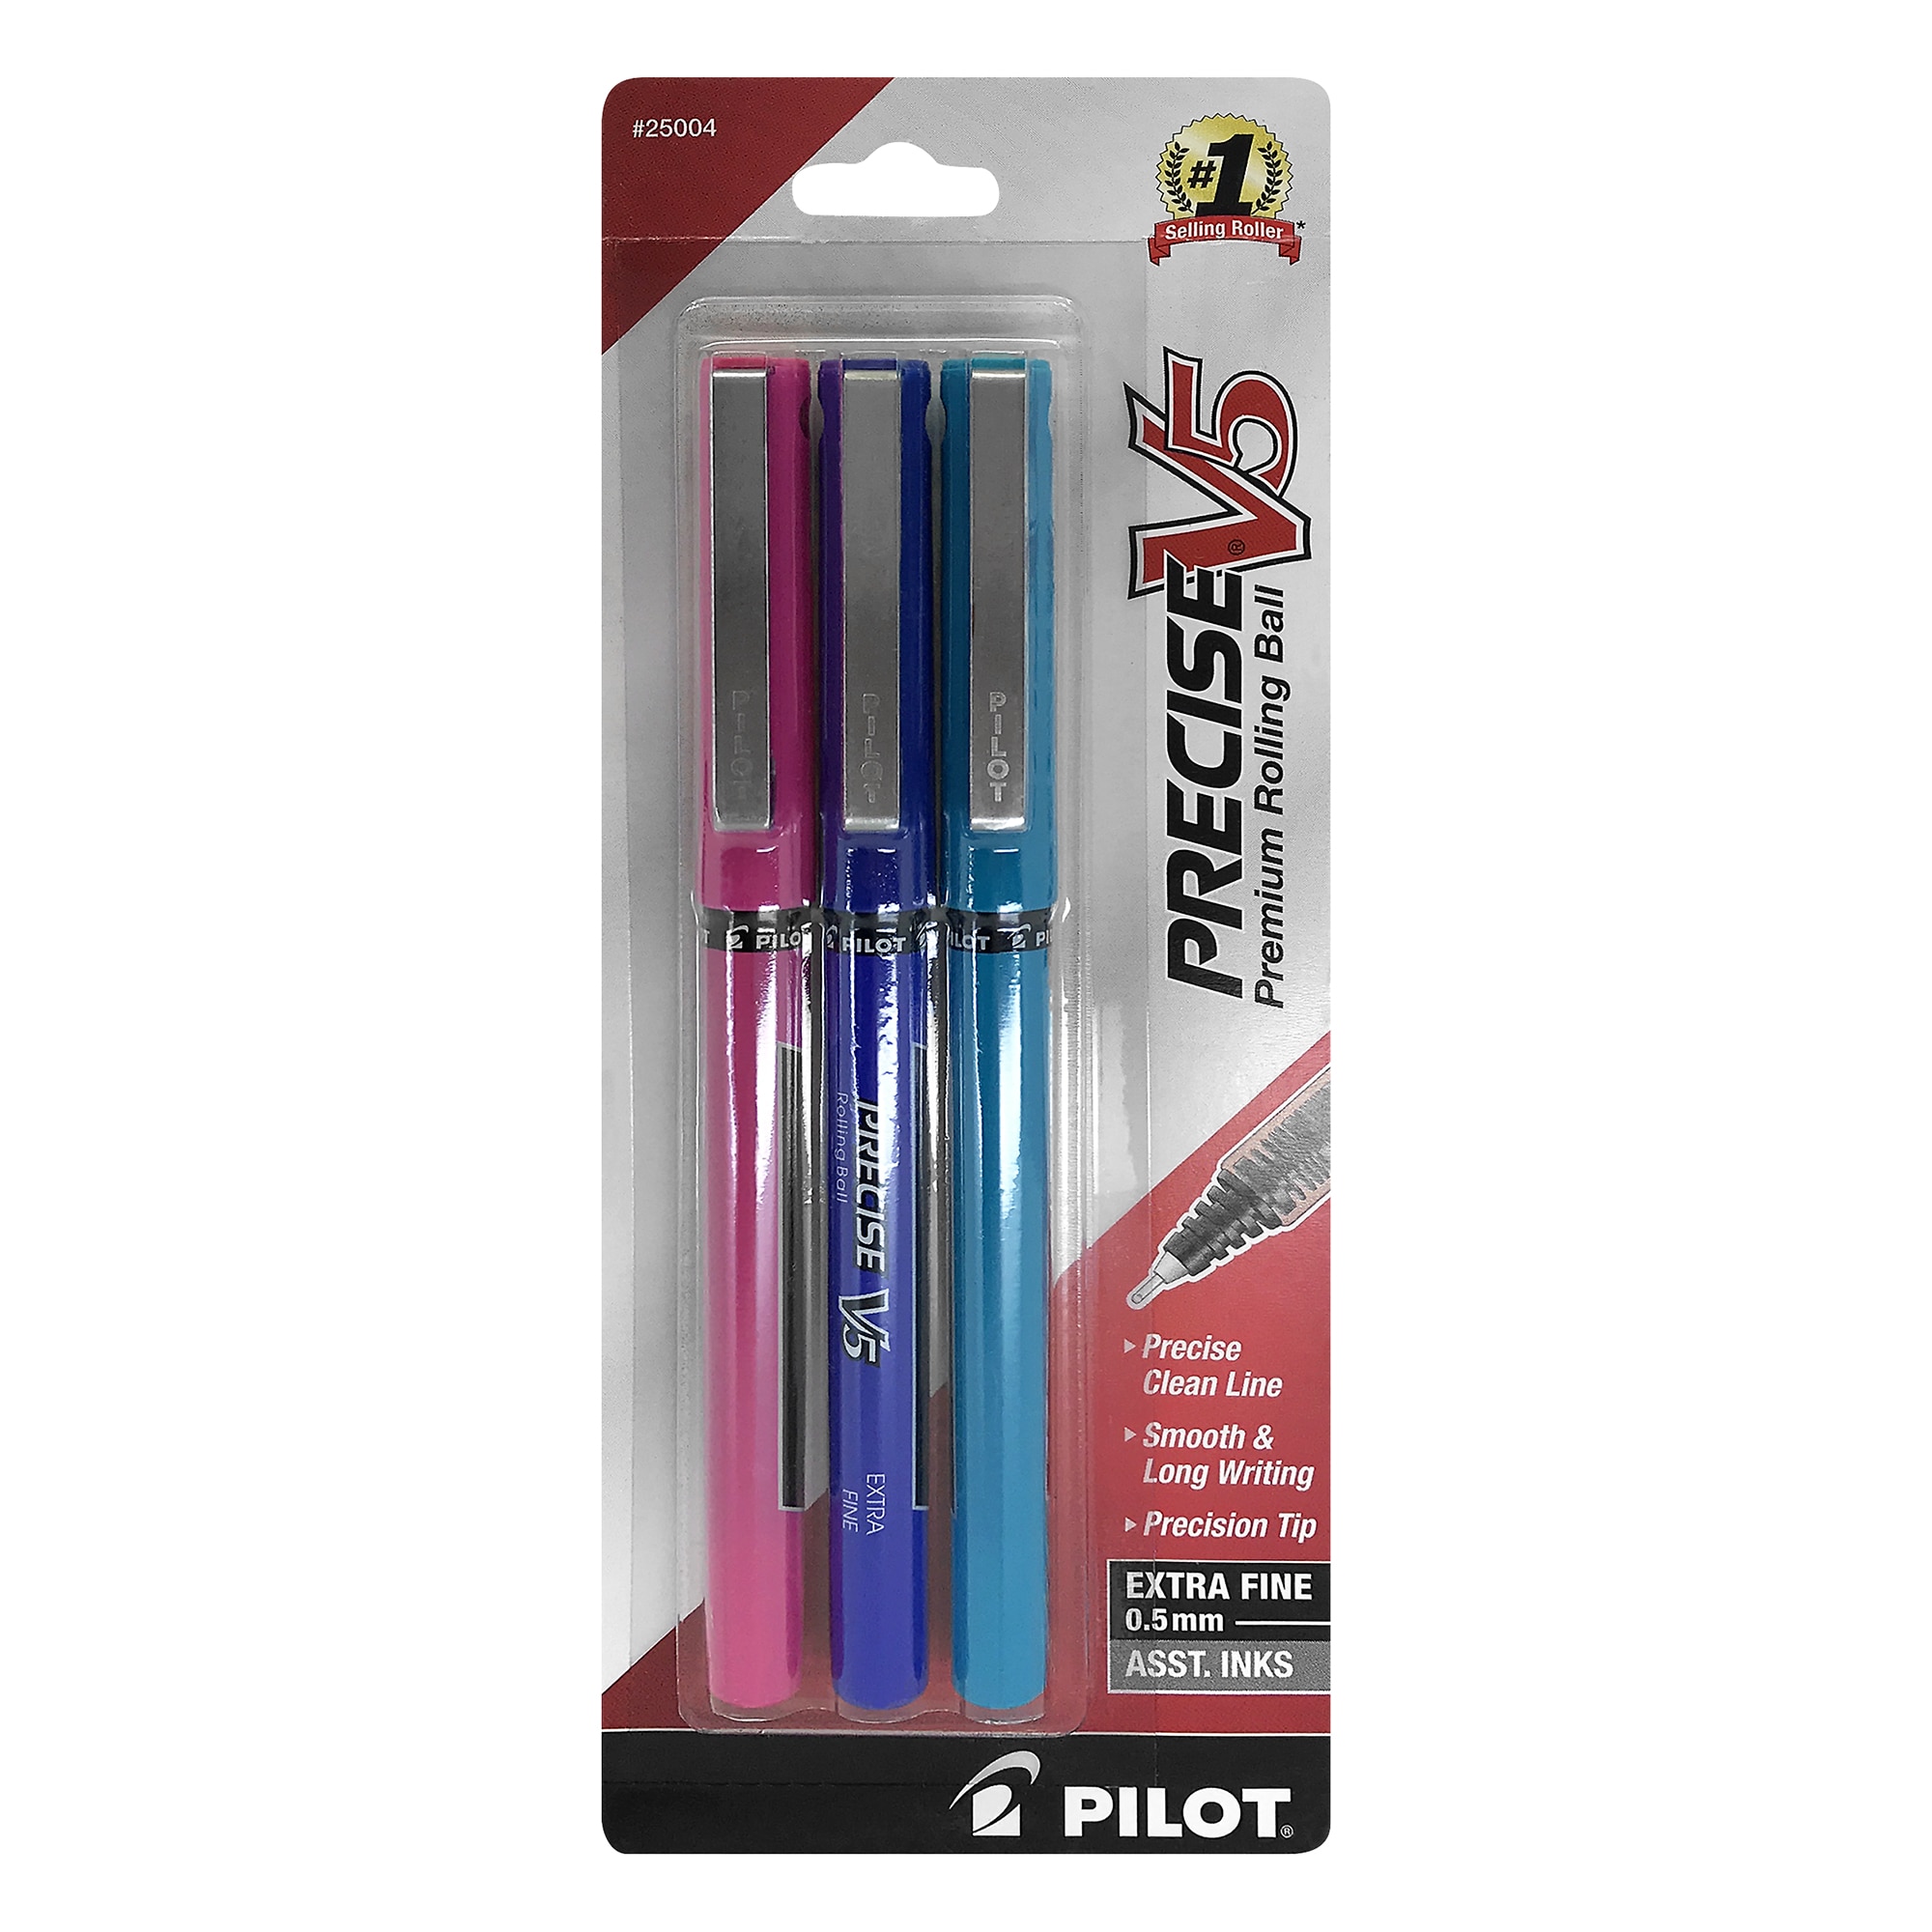 Pilot Precise V5 Rolling Ball Stick Pens Extra Fine Point (0.5mm) Assorted Colors 3 Count